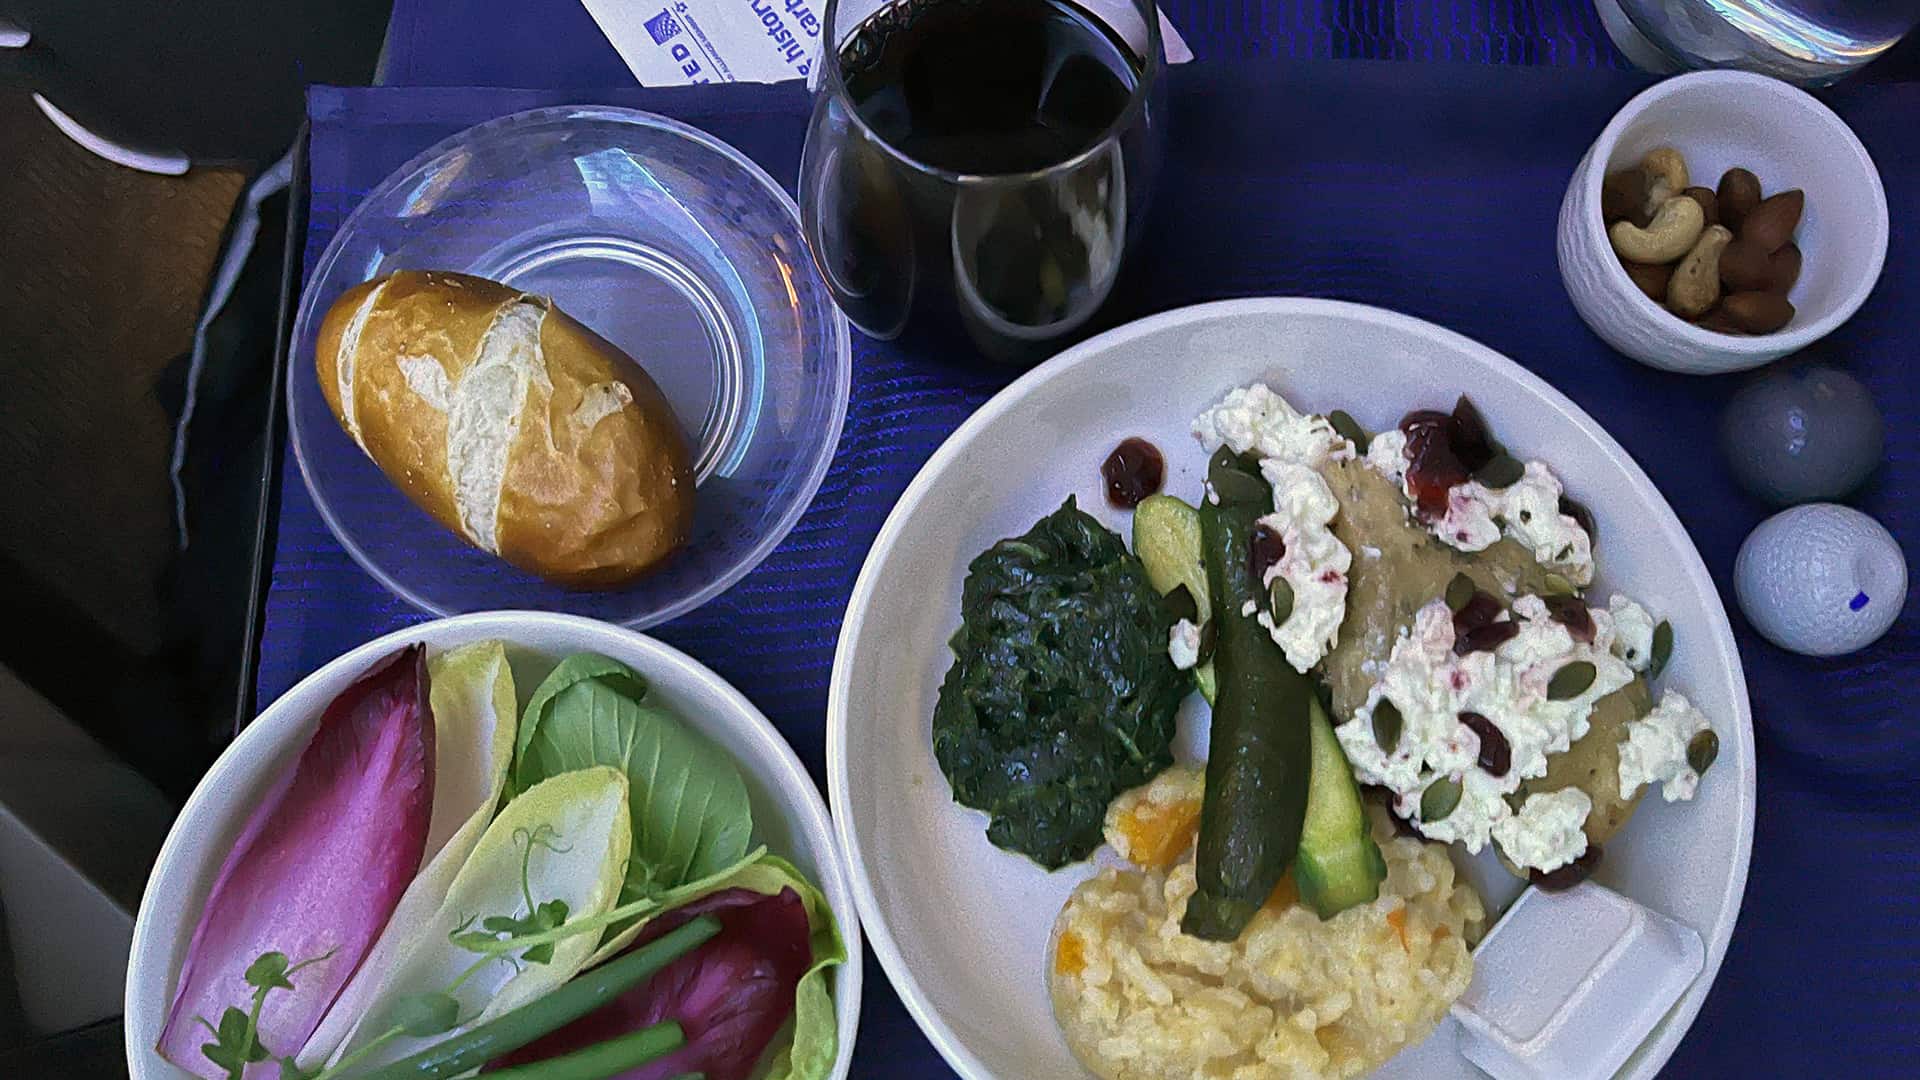 A full meal served on a business class flight on United Airlines which included a salad, bread and wine.